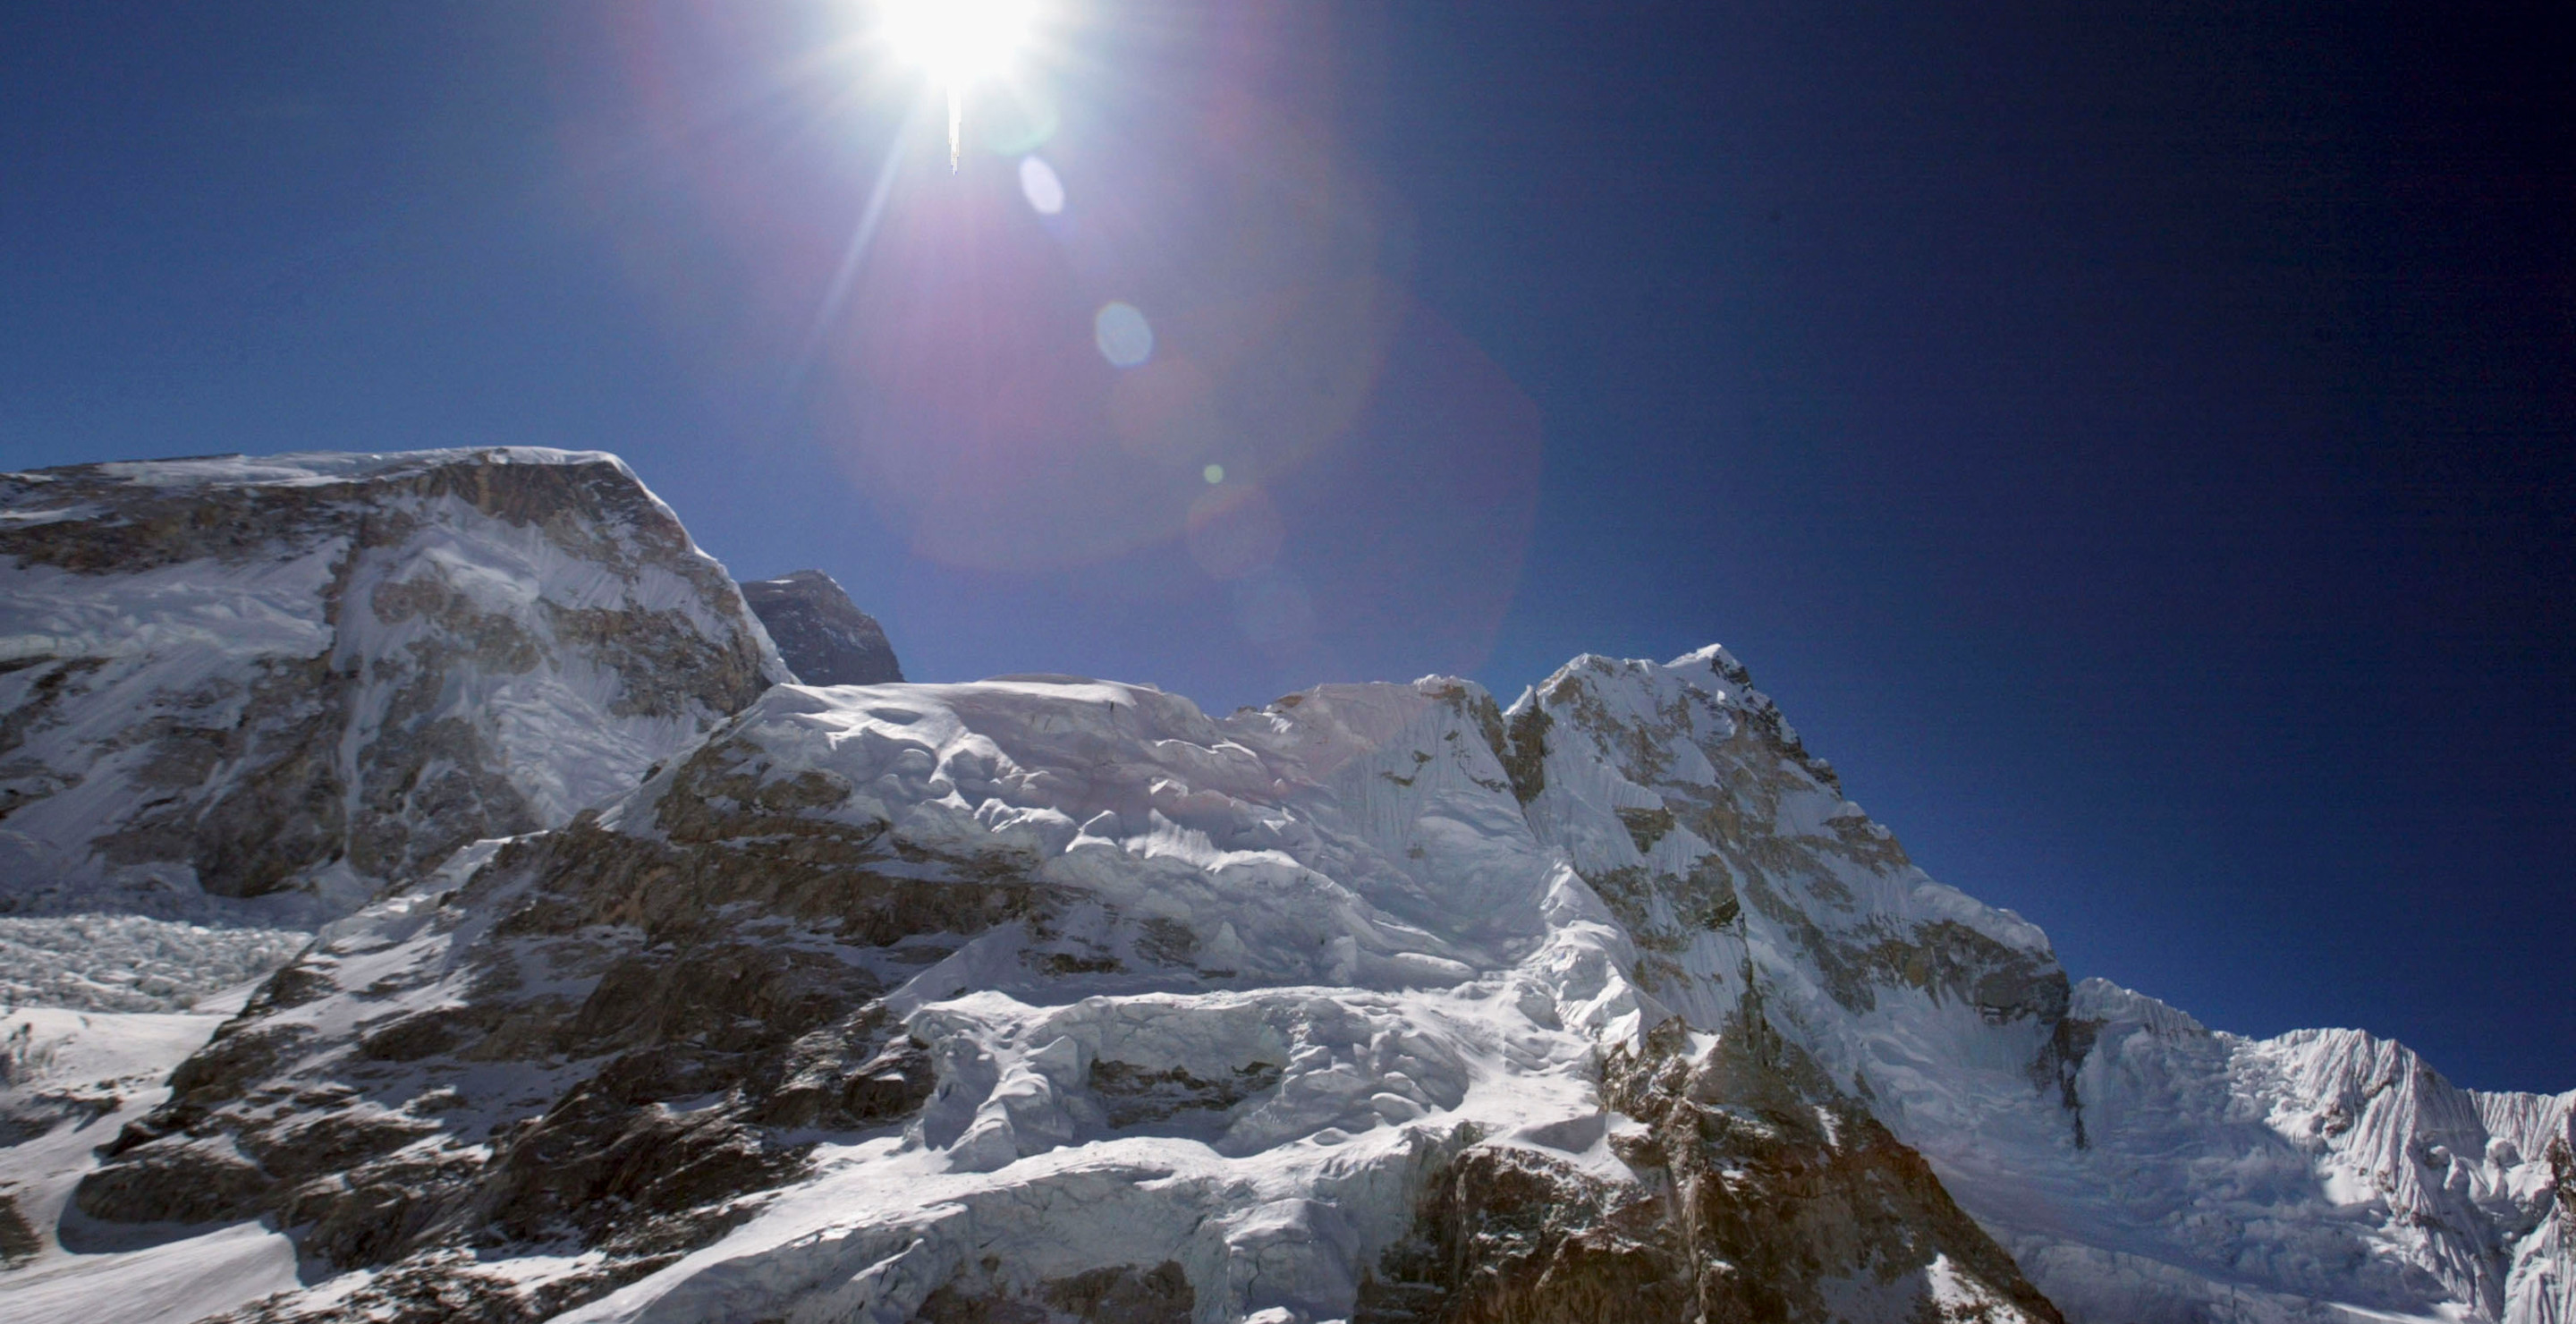 Long Lines And Cramped Unsafe Conditions At Mount Everest Criticized After Two Climbers Go Missing